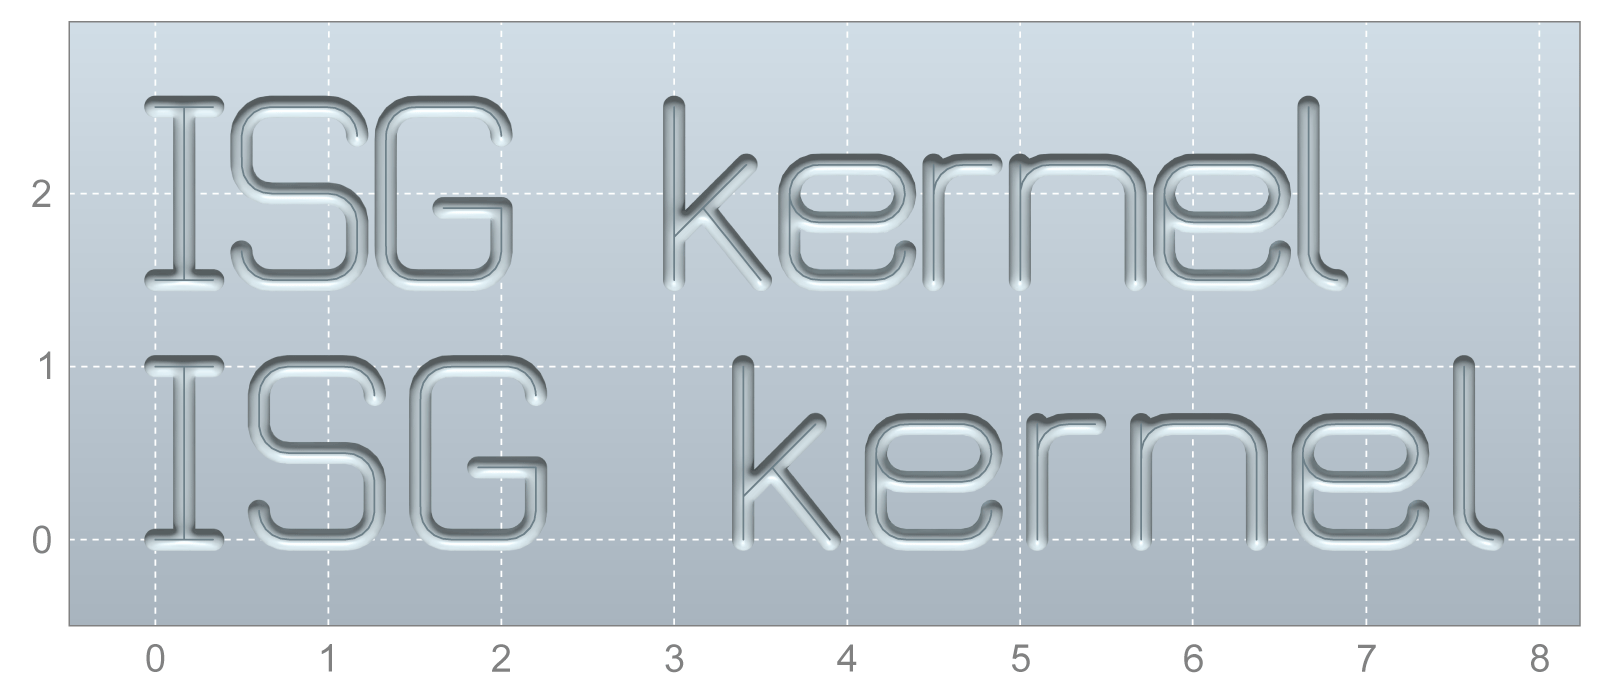 Text with normal spacing (top) and slightly increased spacing (bottom)